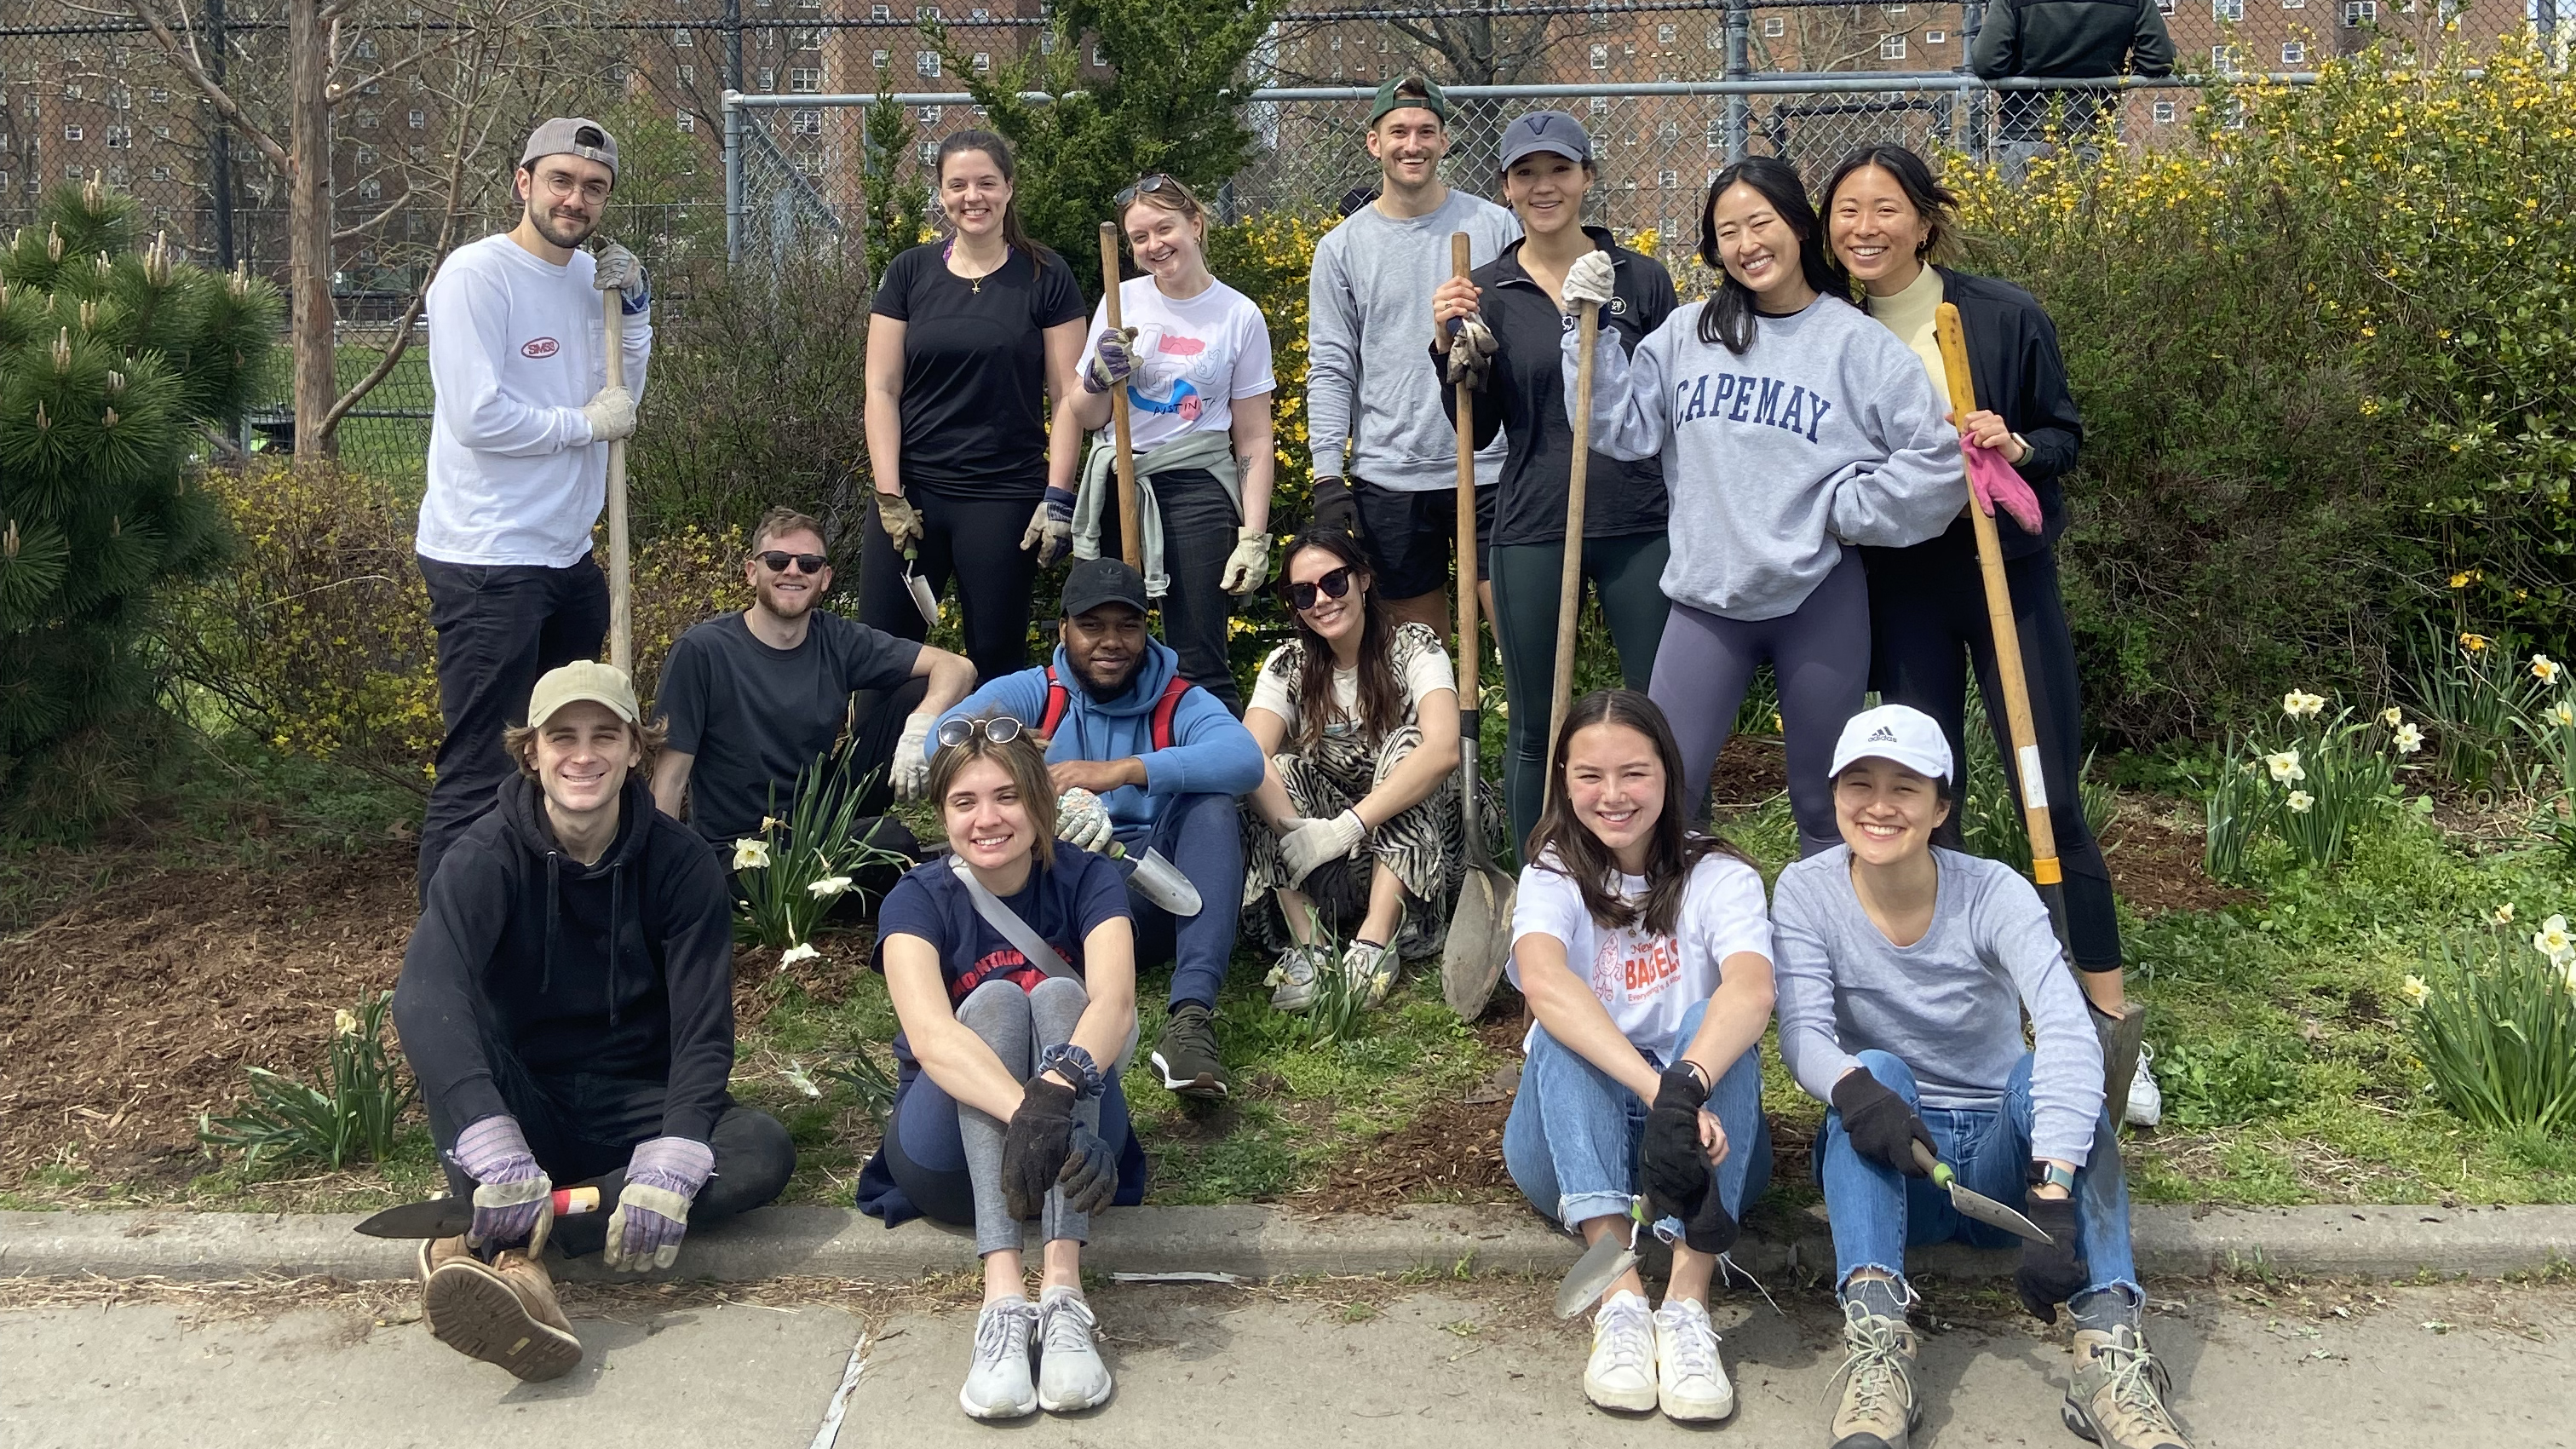 Group photo of Yext team members volunteering at a roadside cleanup event.